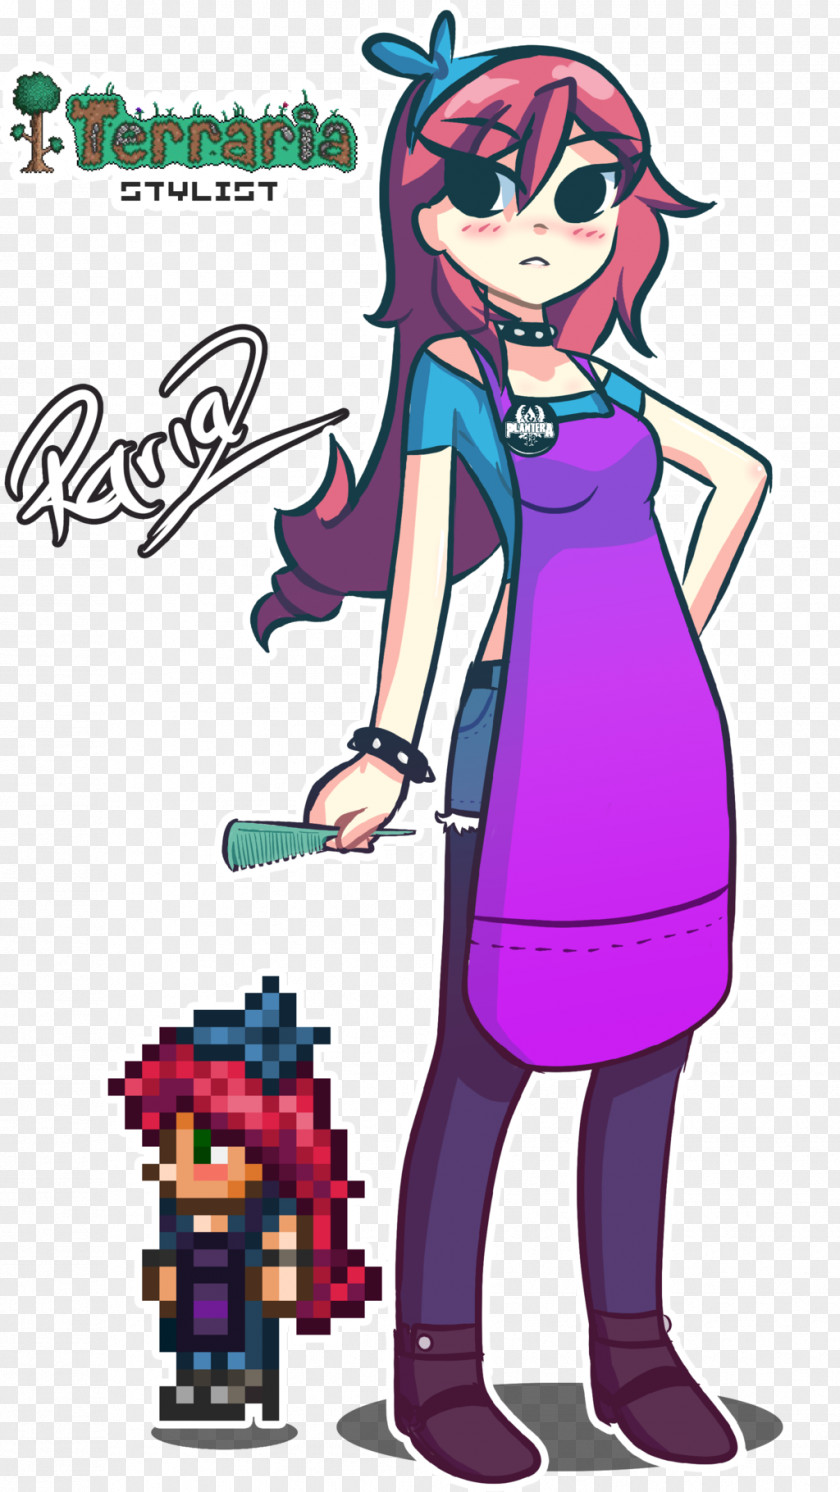 Minecraft Terraria Video Game Non-player Character Fashion Designer PNG